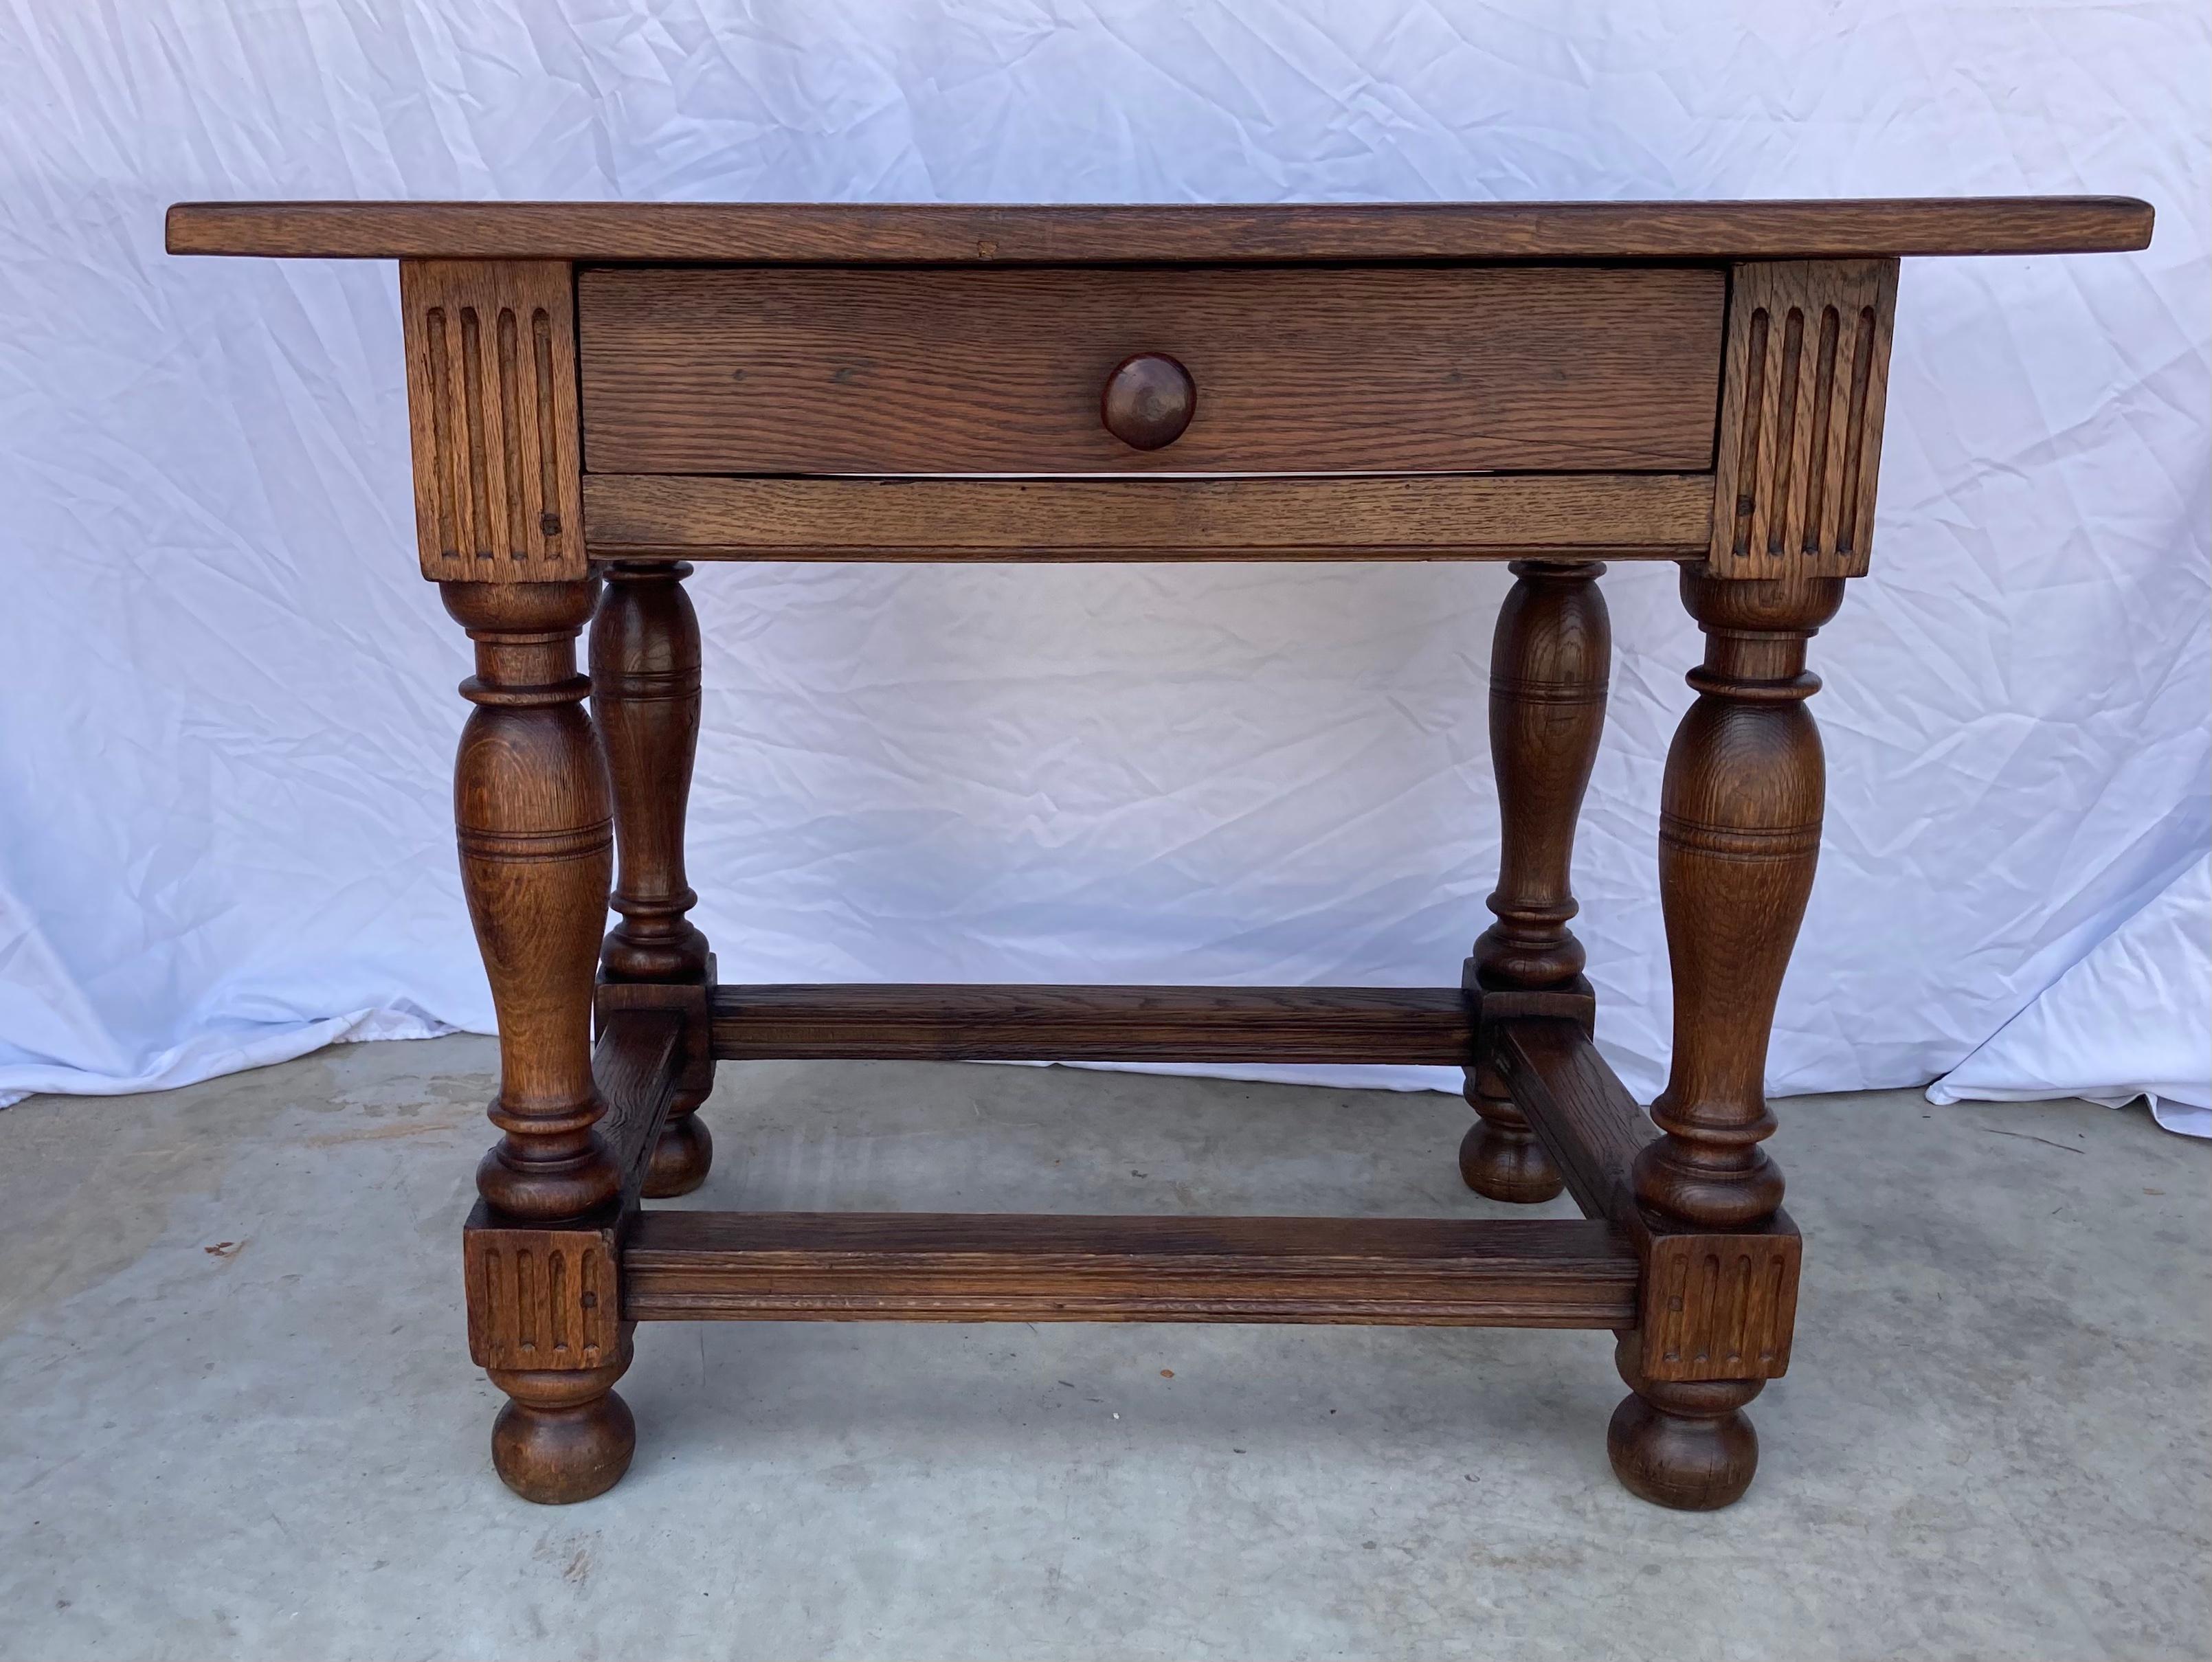 Rectangular side table built using oak and pegged construction in the late 1700s in the Netherlands. This table shows beautiful craftsmanship and proportions. The top features an inset panel attached to the base with rose-head nails, and sits on a